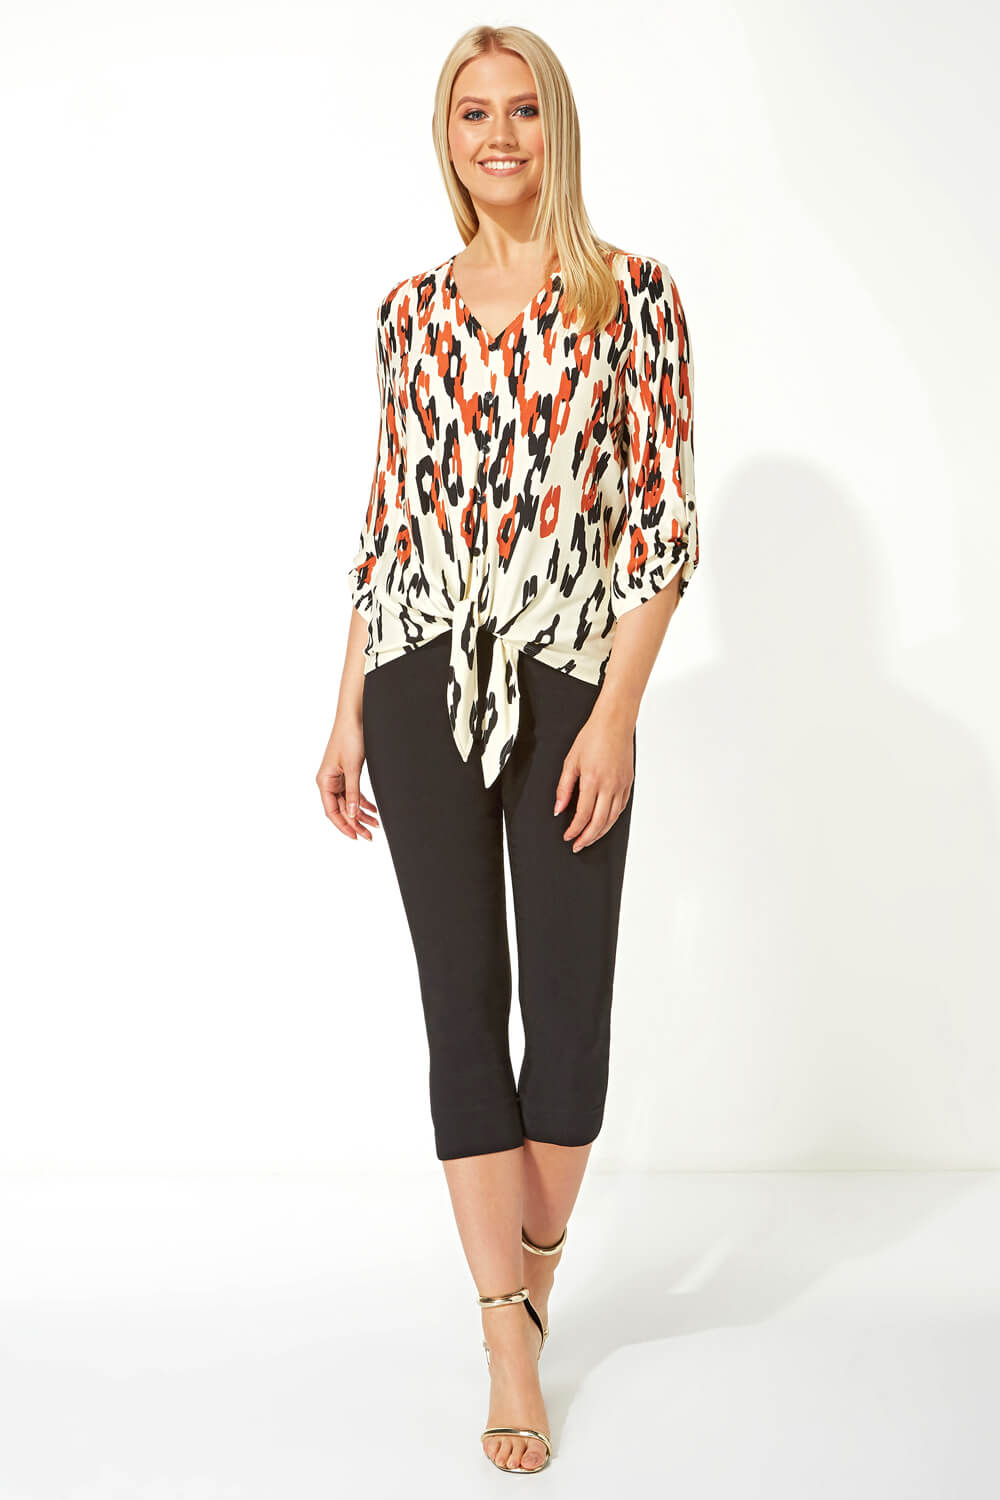 Neutral Tie Front Animal Print Top, Image 2 of 5